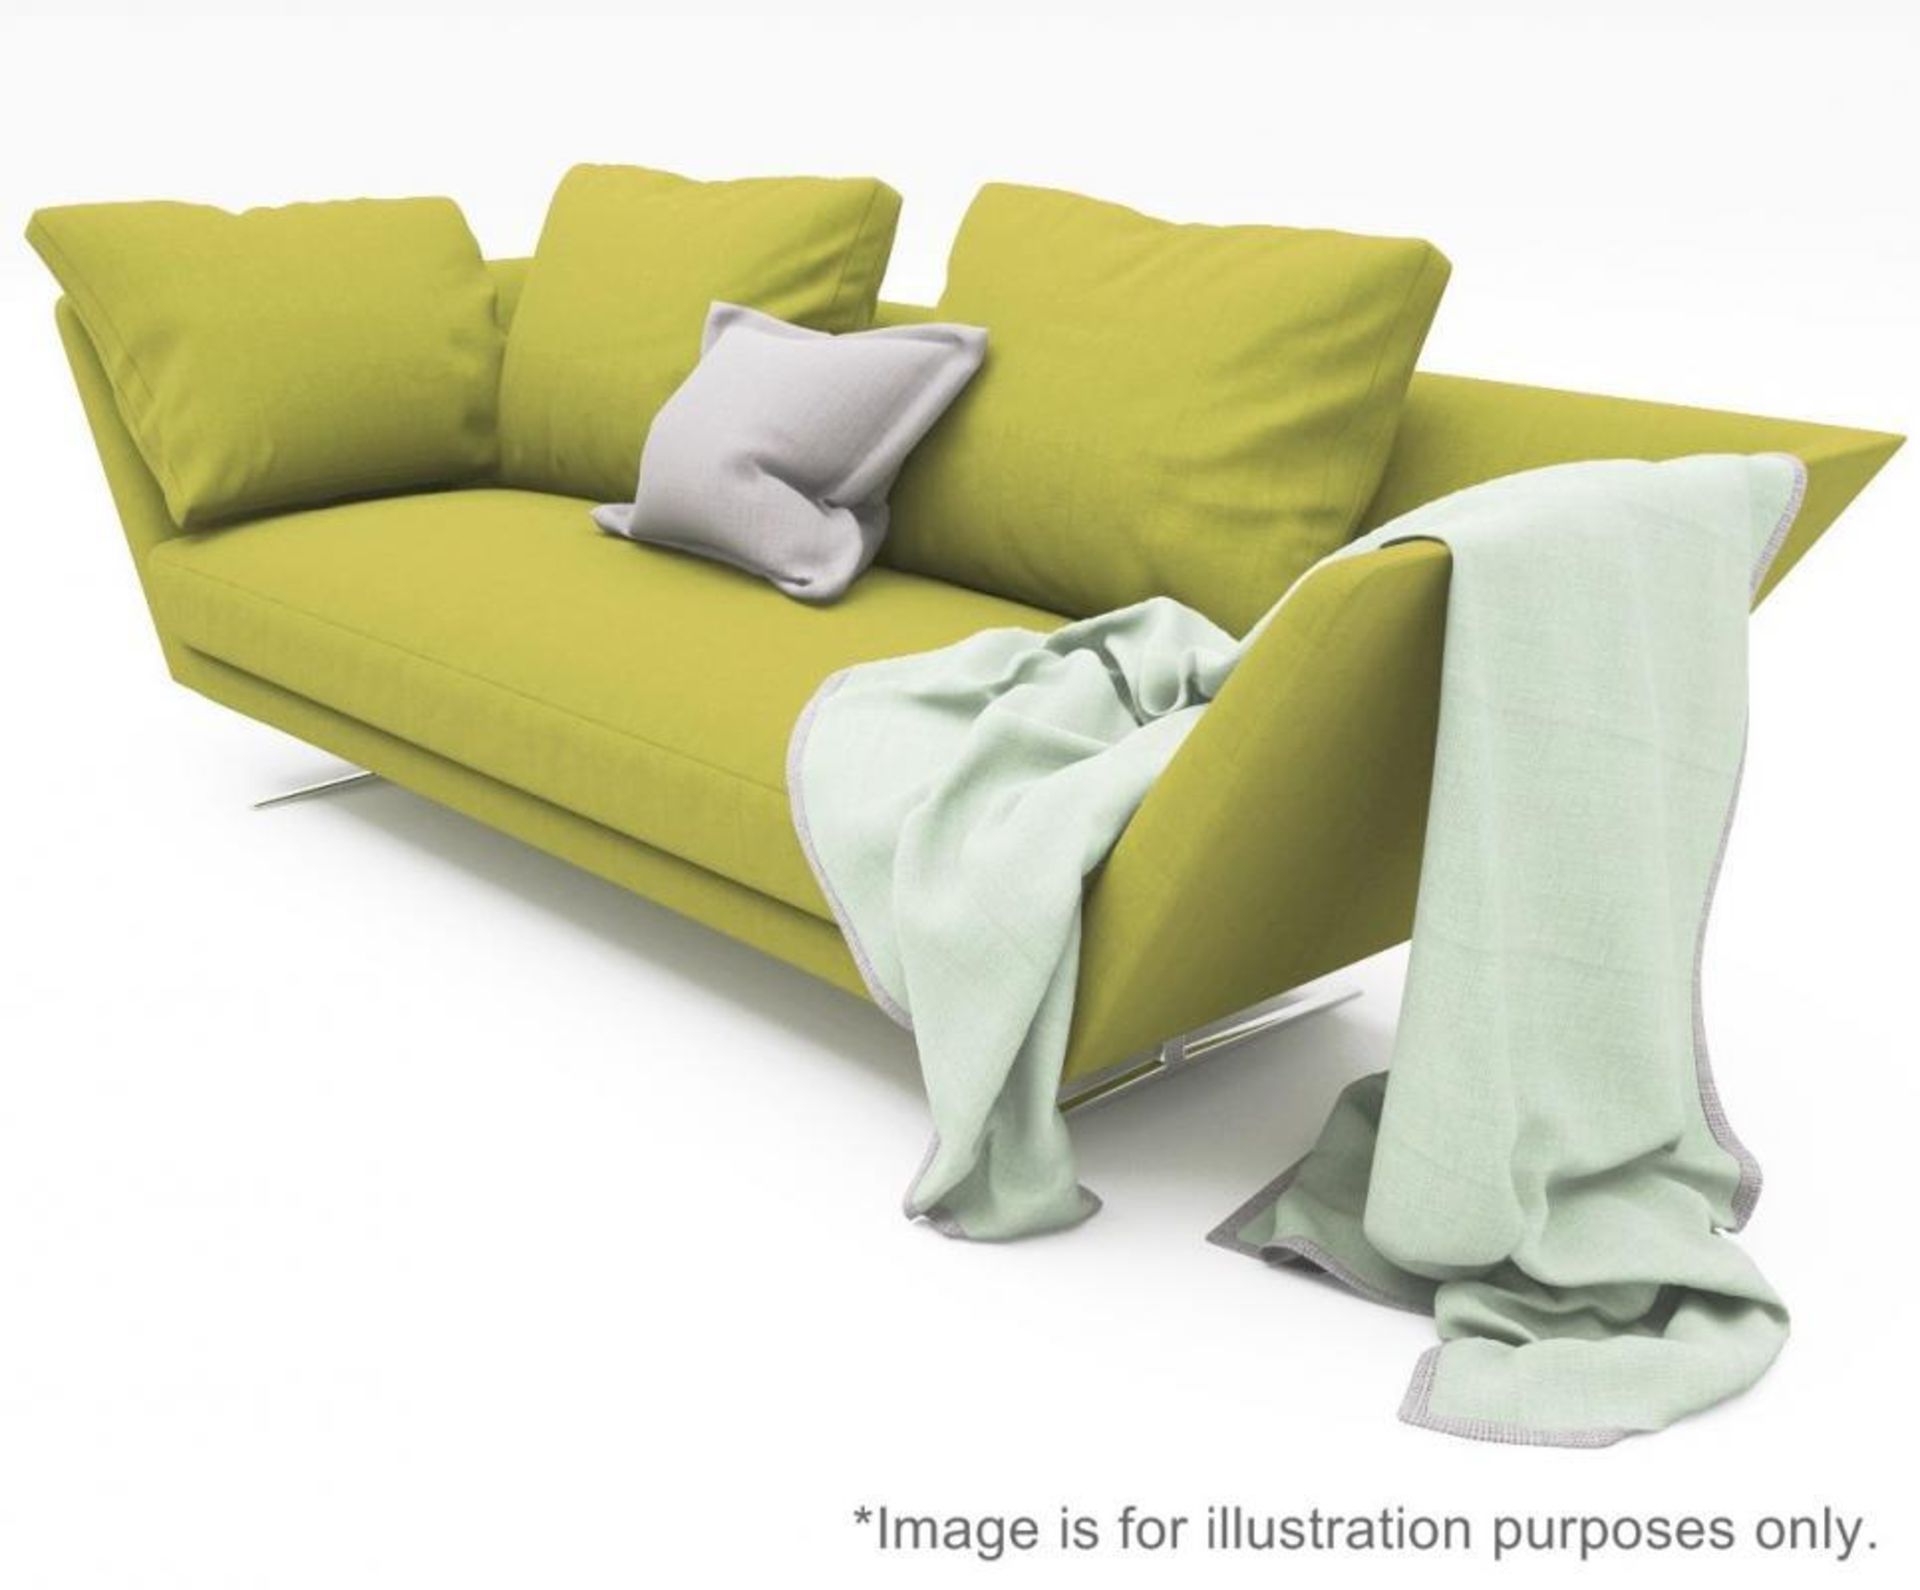 Flexform "Zeus" Sofa / Chais With 2 Scatter Cushions - Featuring A Shimmering Lime Chenille